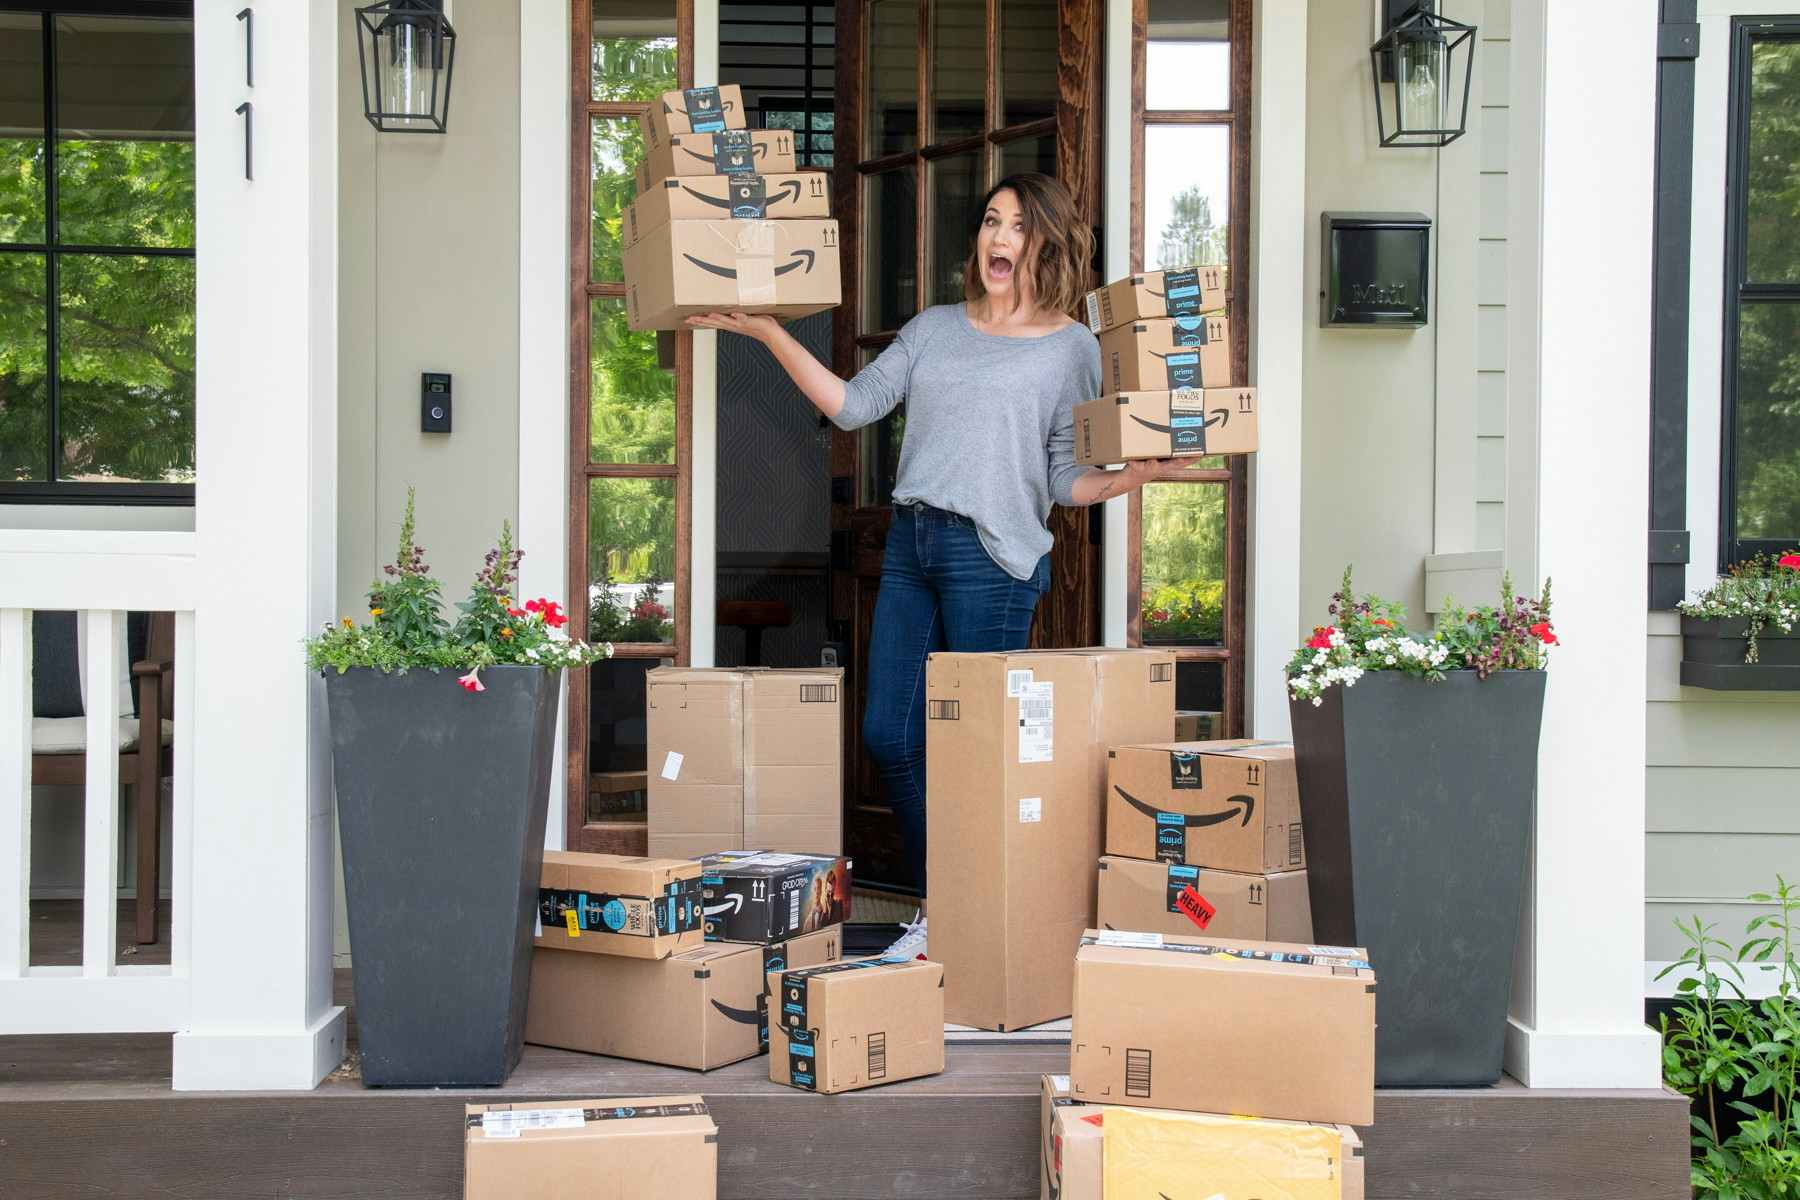 A woman excitedly holding amazon boxes on a porch full of boxes